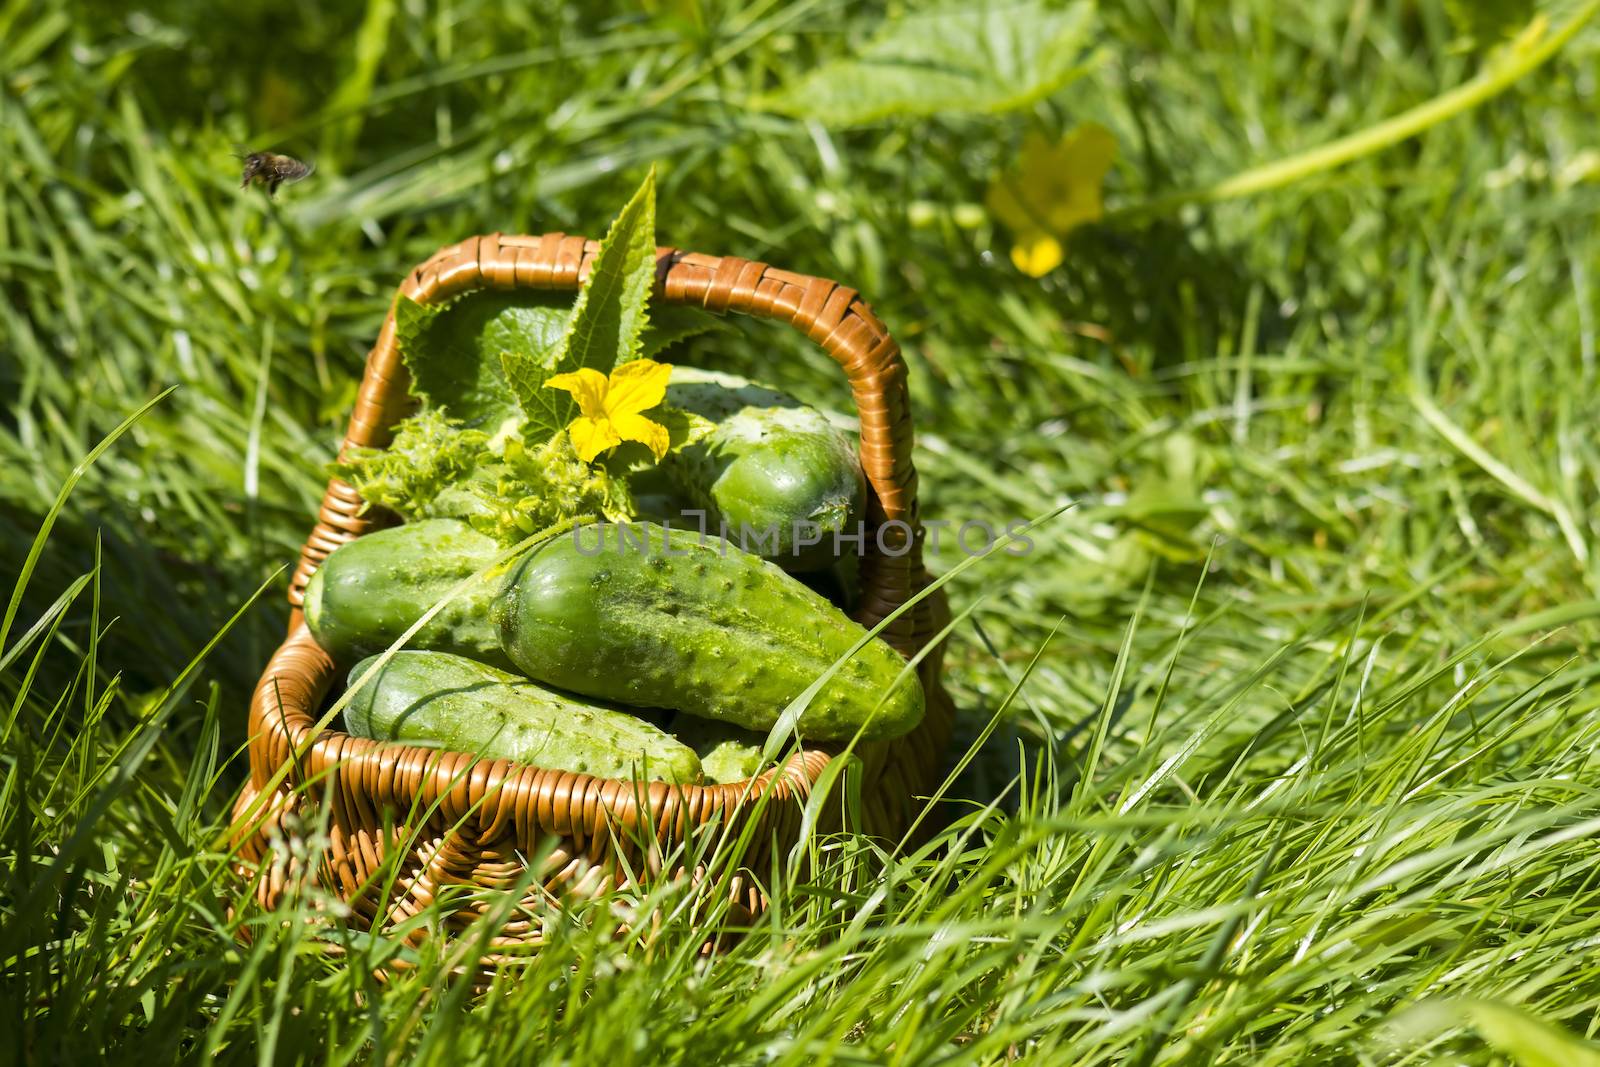 Harvest cucumbers in a basket  by miradrozdowski